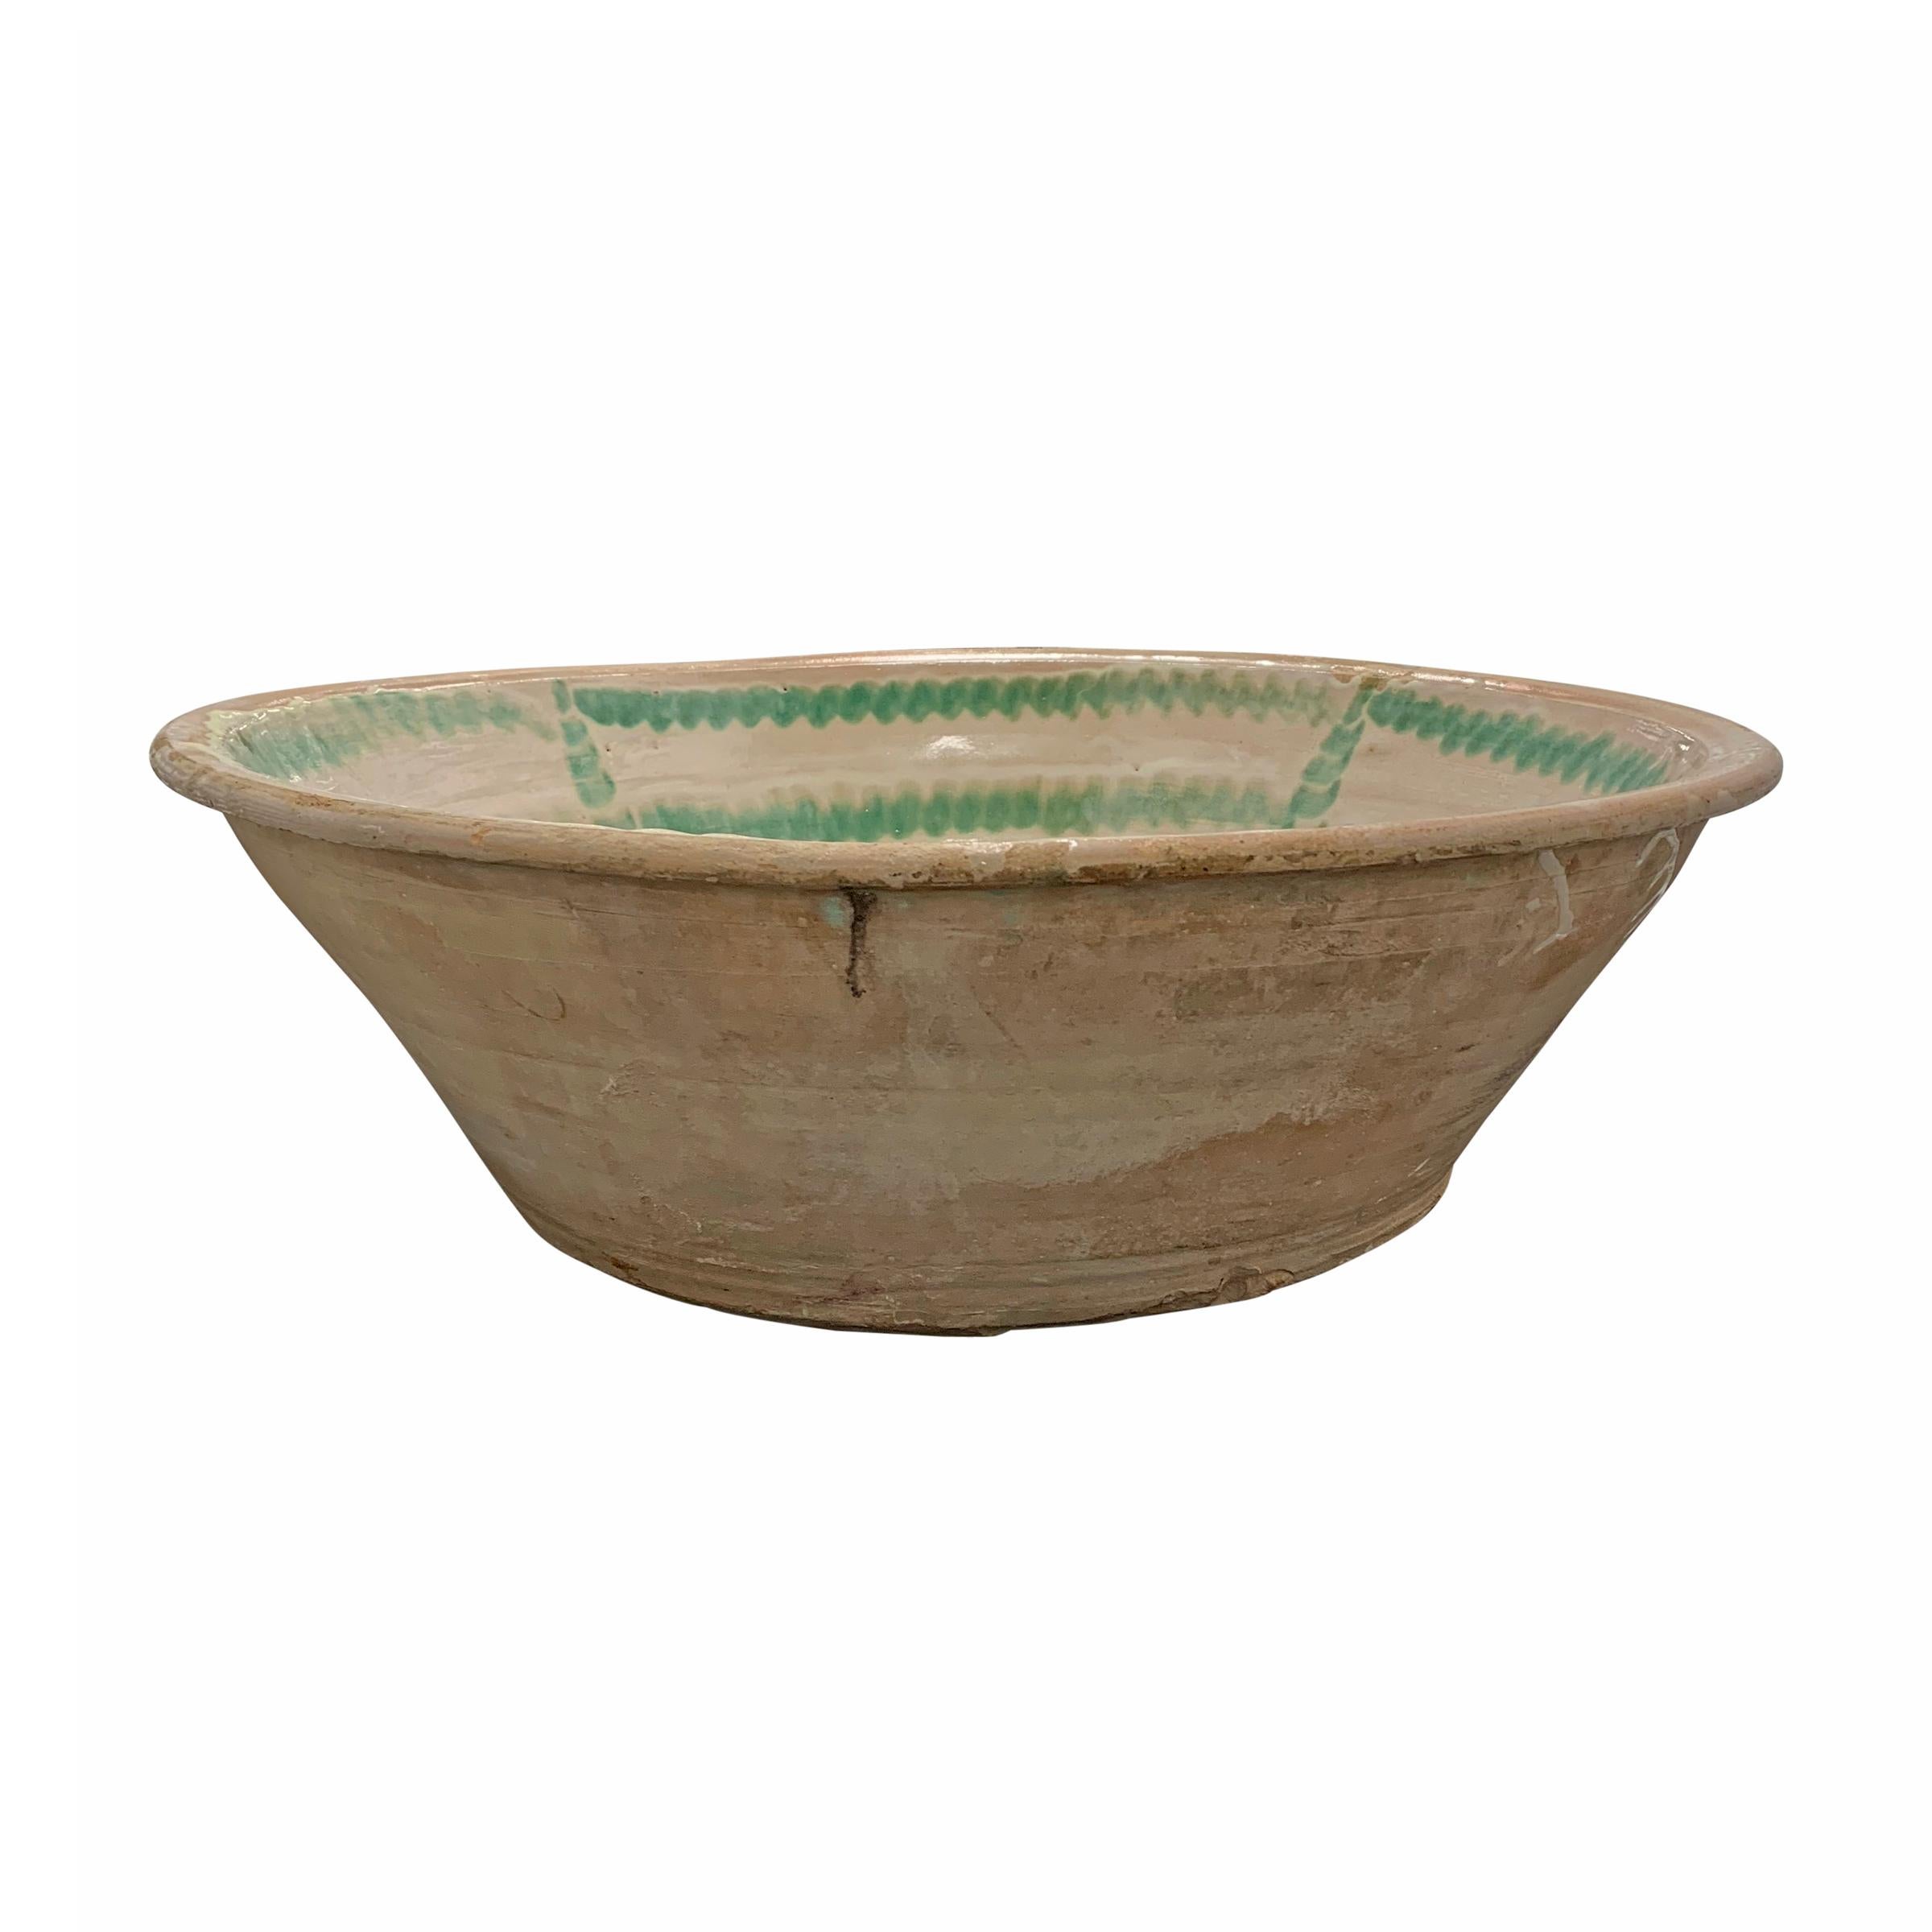 Spanish Monumental Andalusian Pottery Bowl